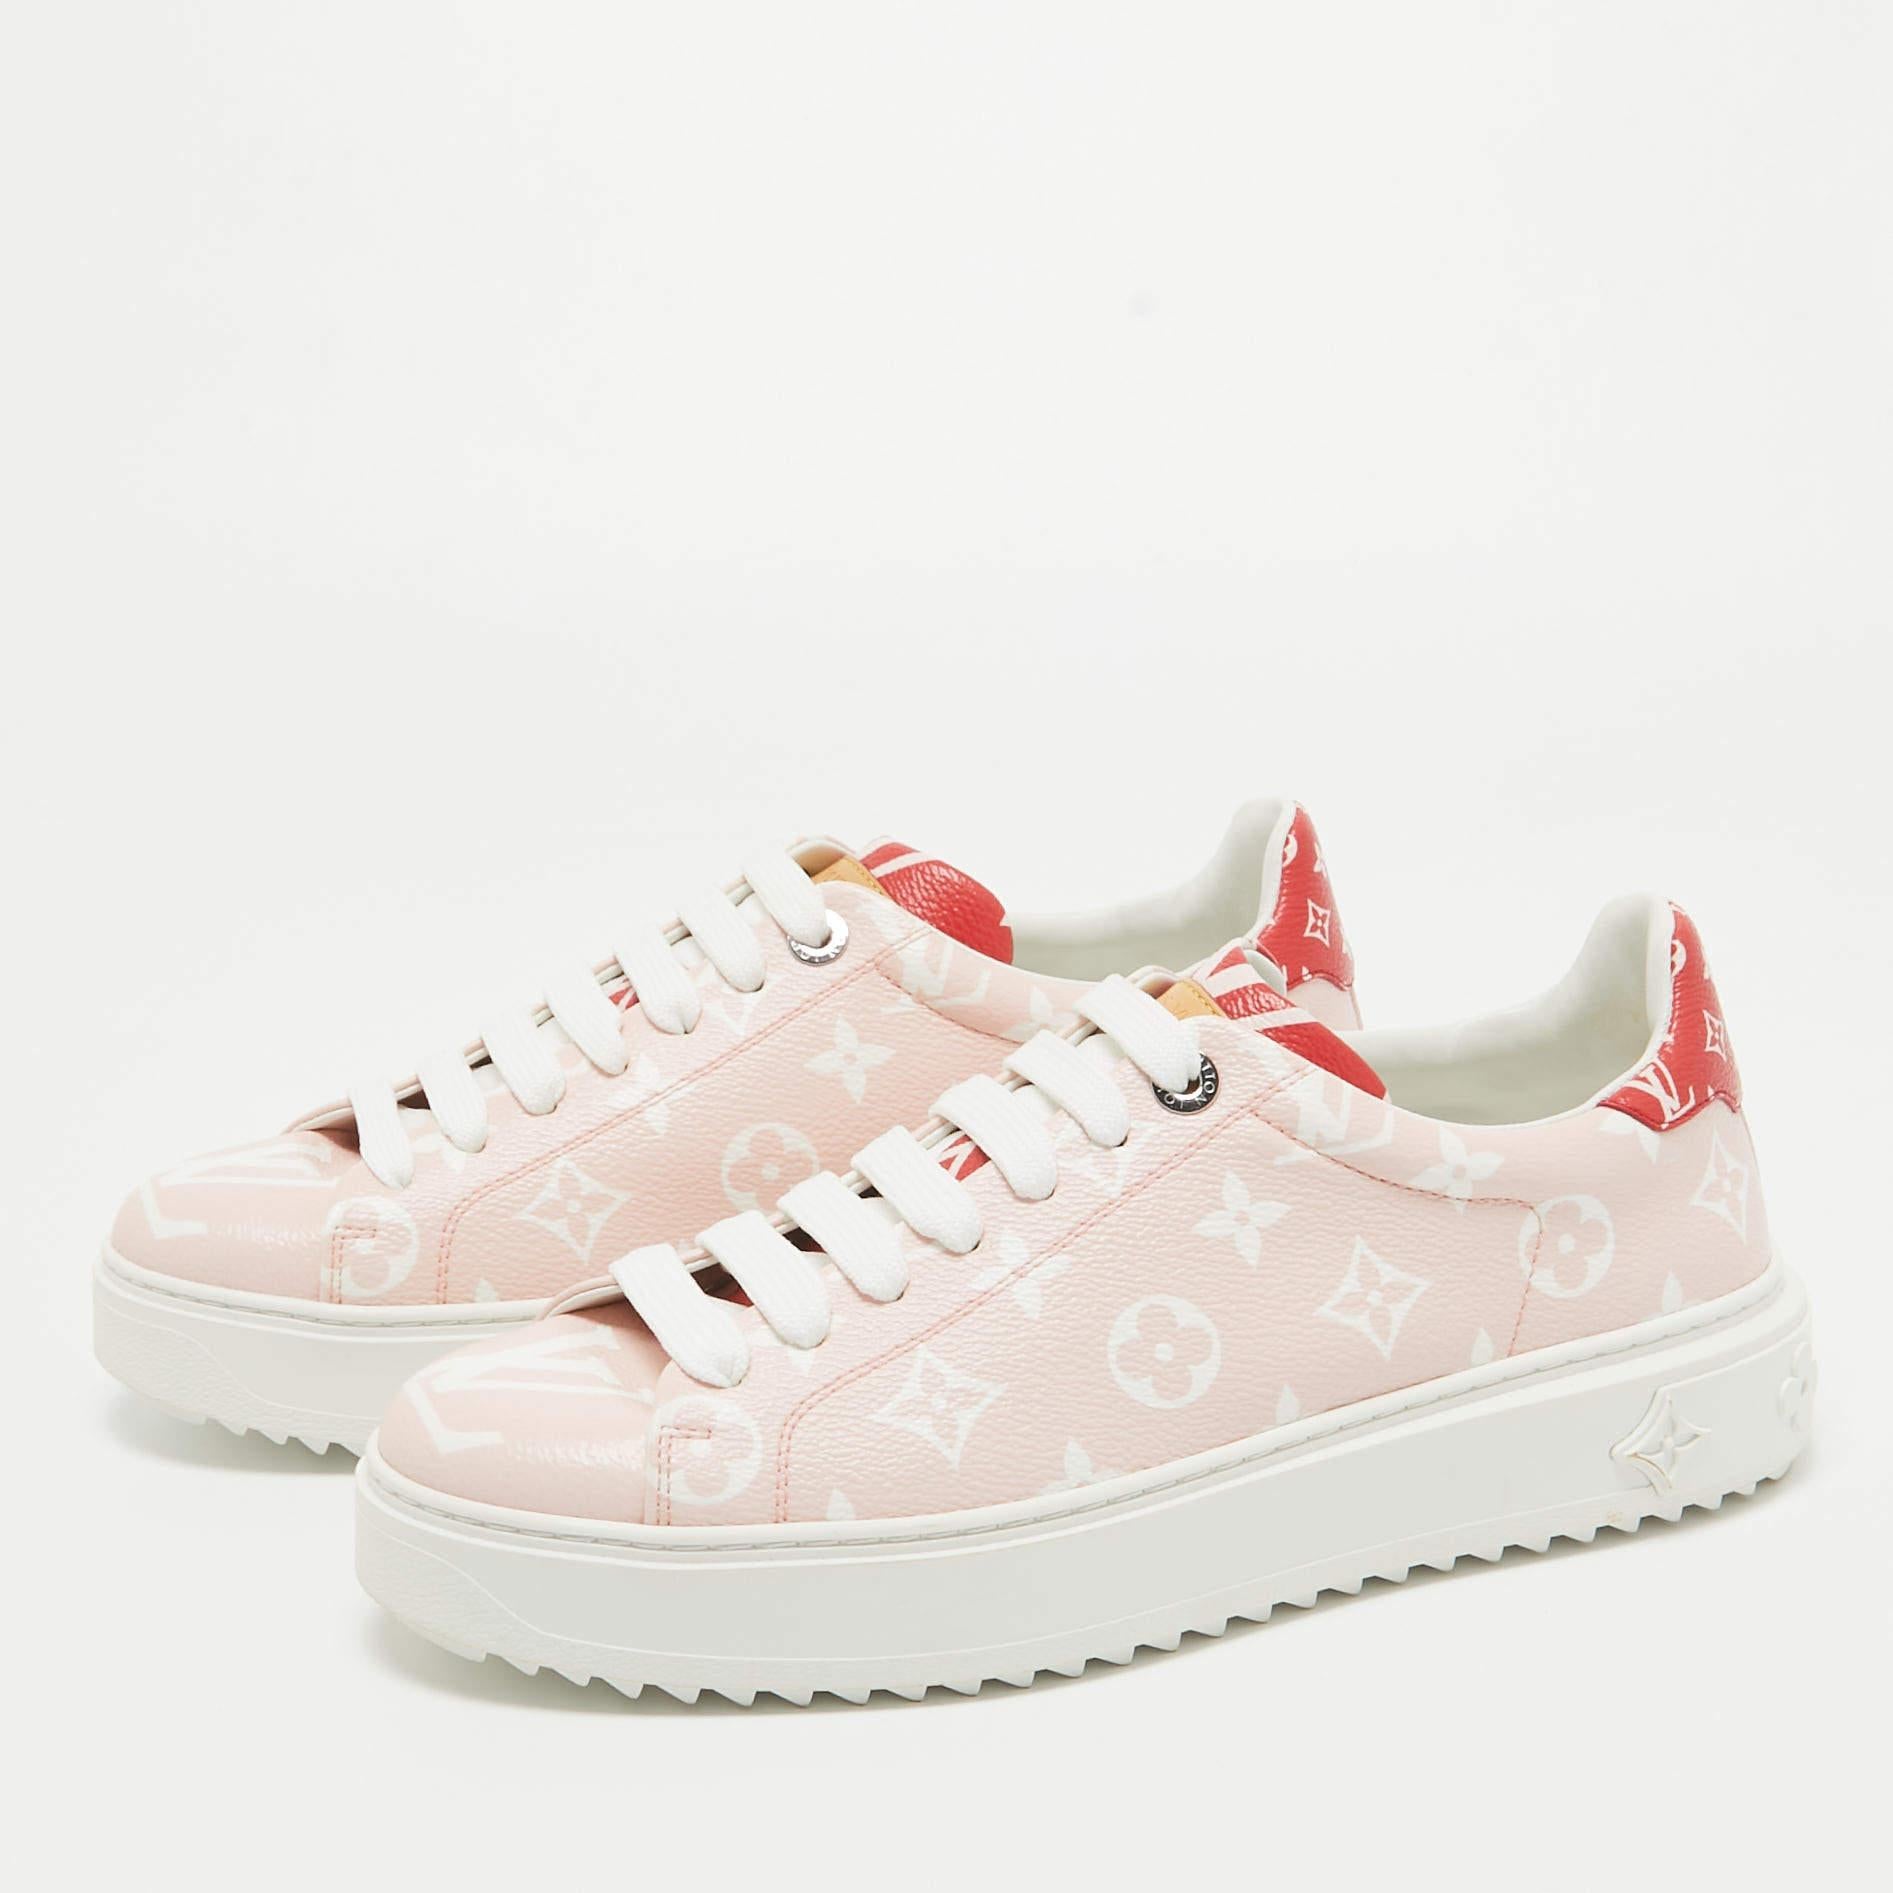 Louis Vuitton Pink Monogram Canvas Time Out Sneakers Size 40 2